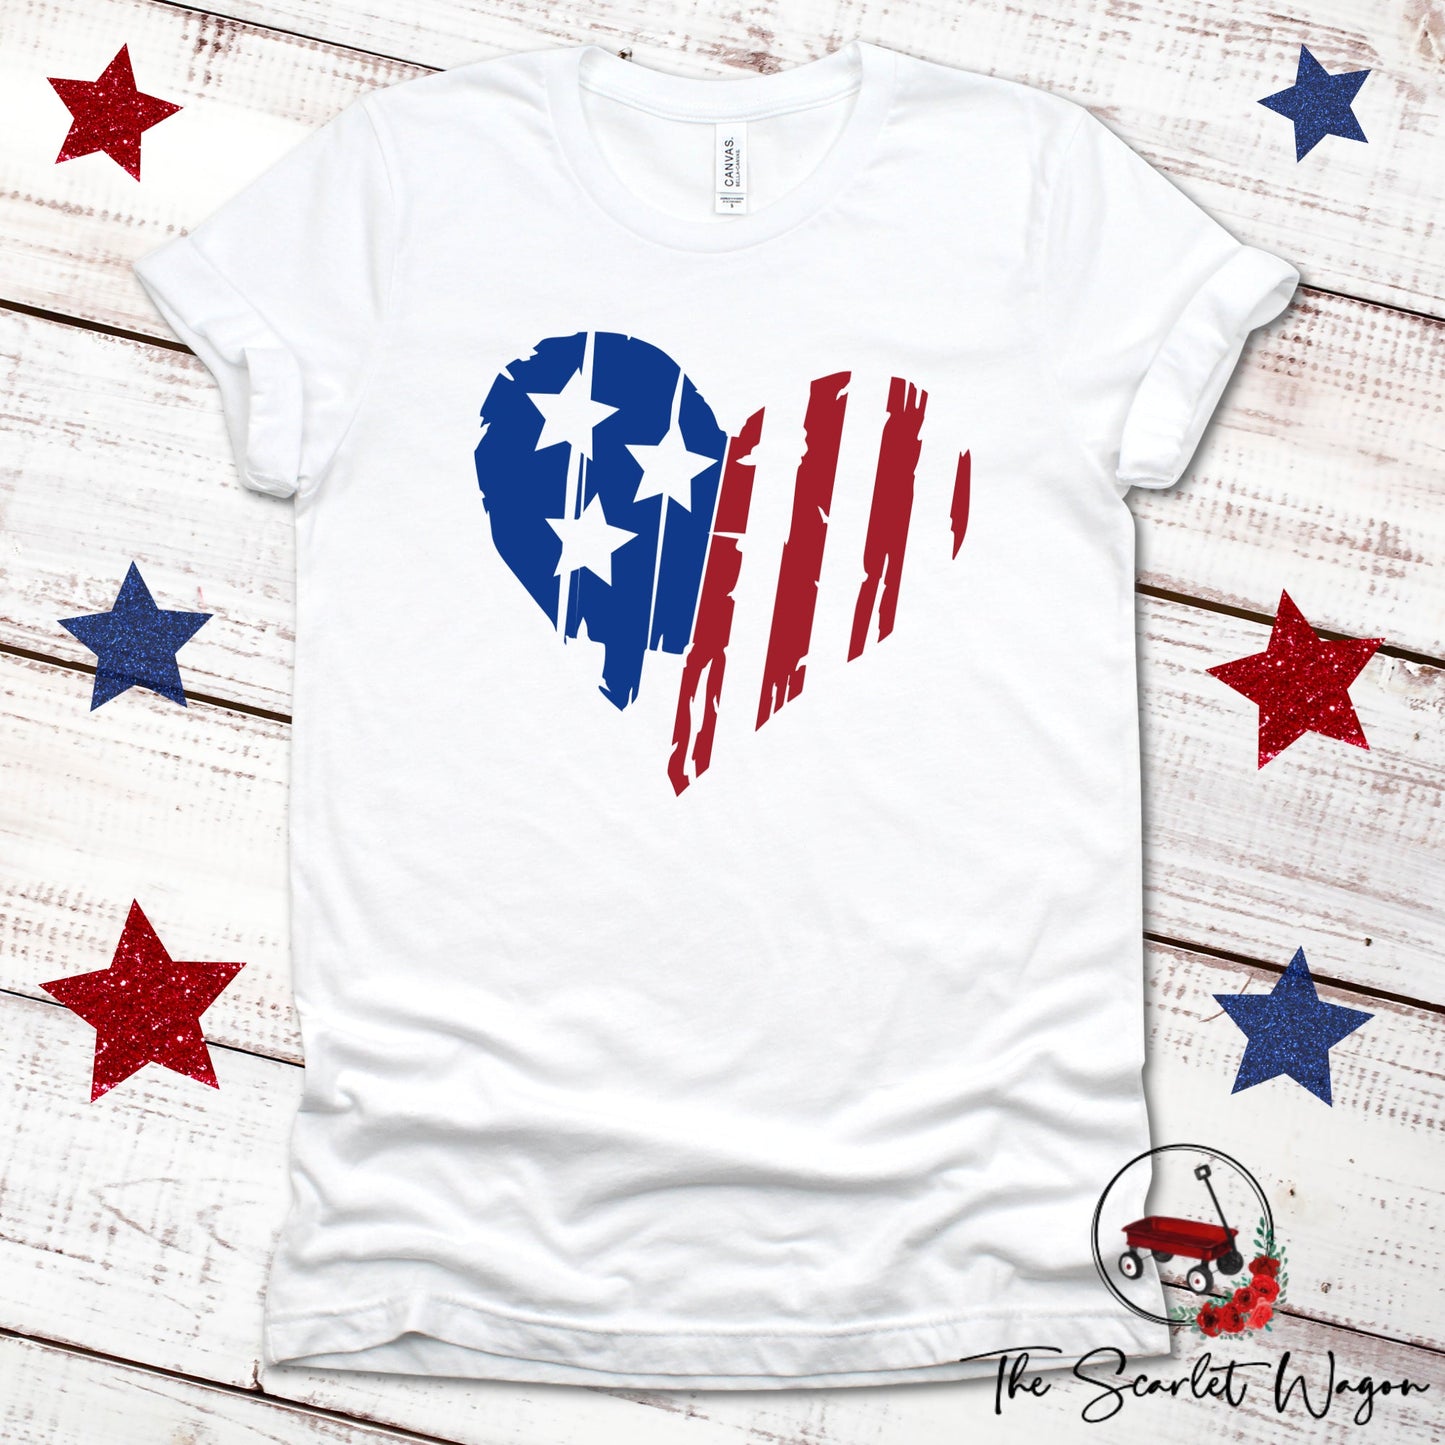 Distressed Heart-Shaped Flag Unisex Tee Patriotic Shirt The Scarlet Wagon Boutique White XS 